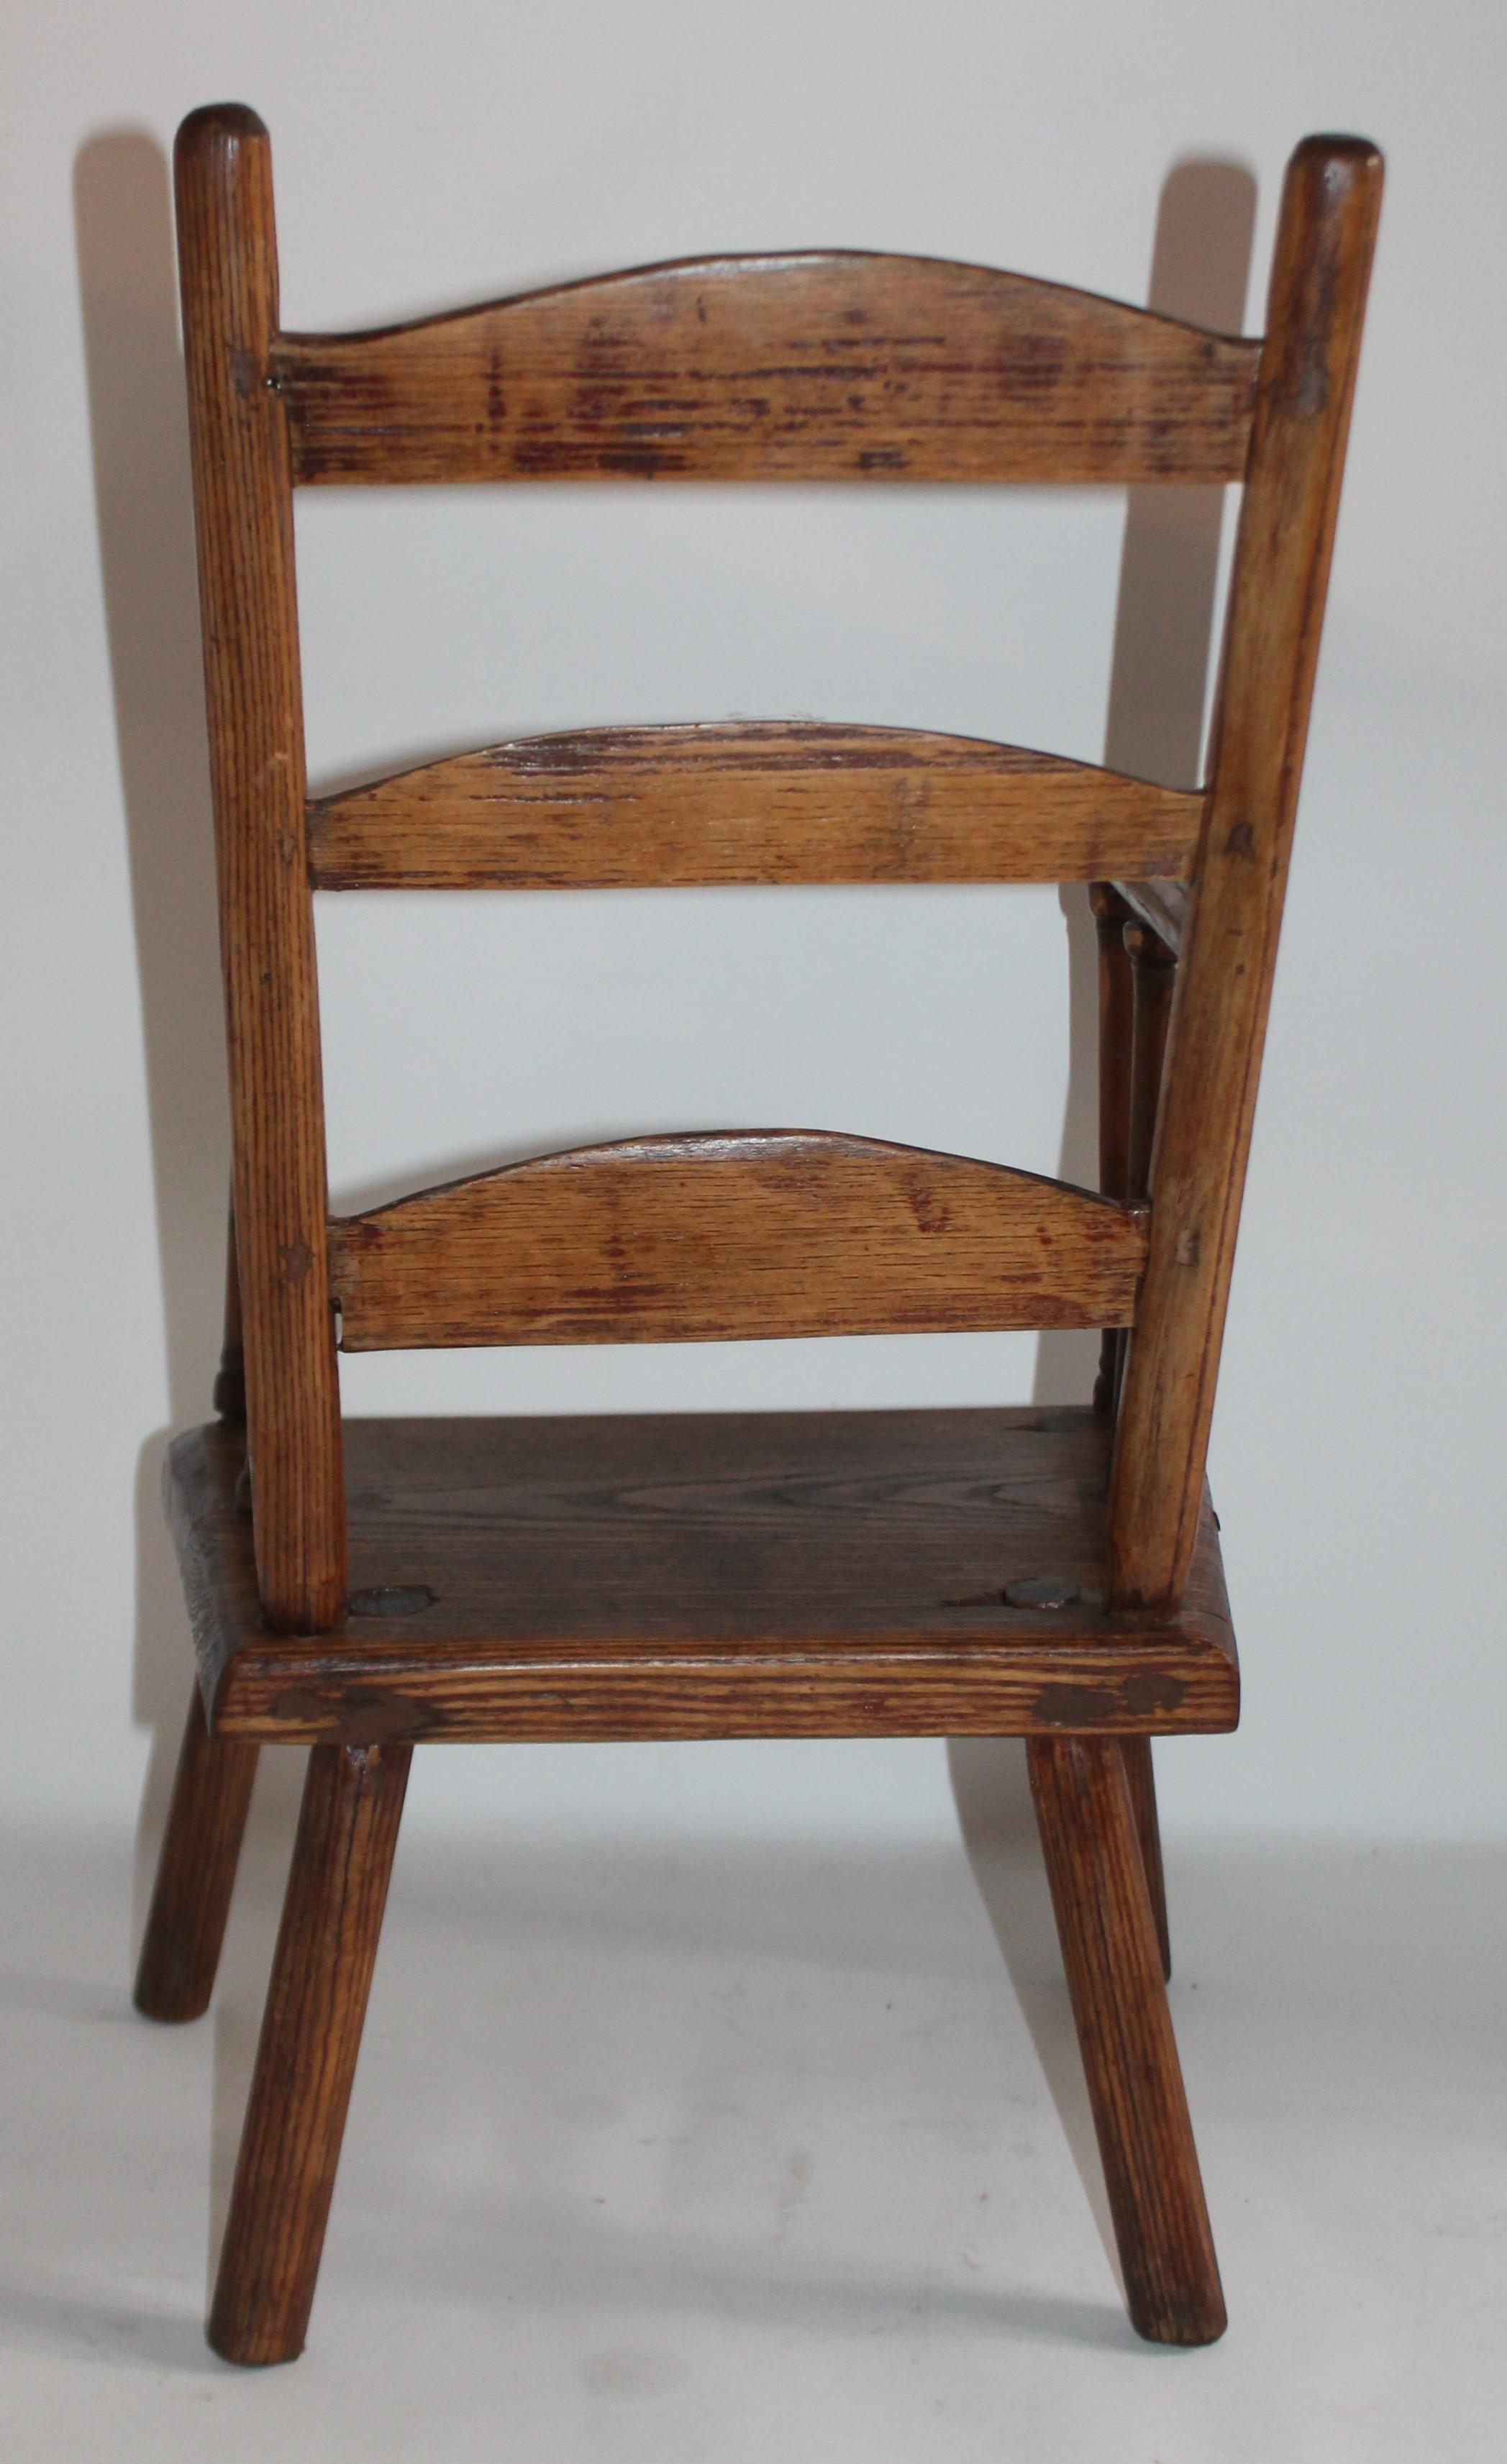 Hand-Crafted Early 19th Century New England Child's Chair For Sale